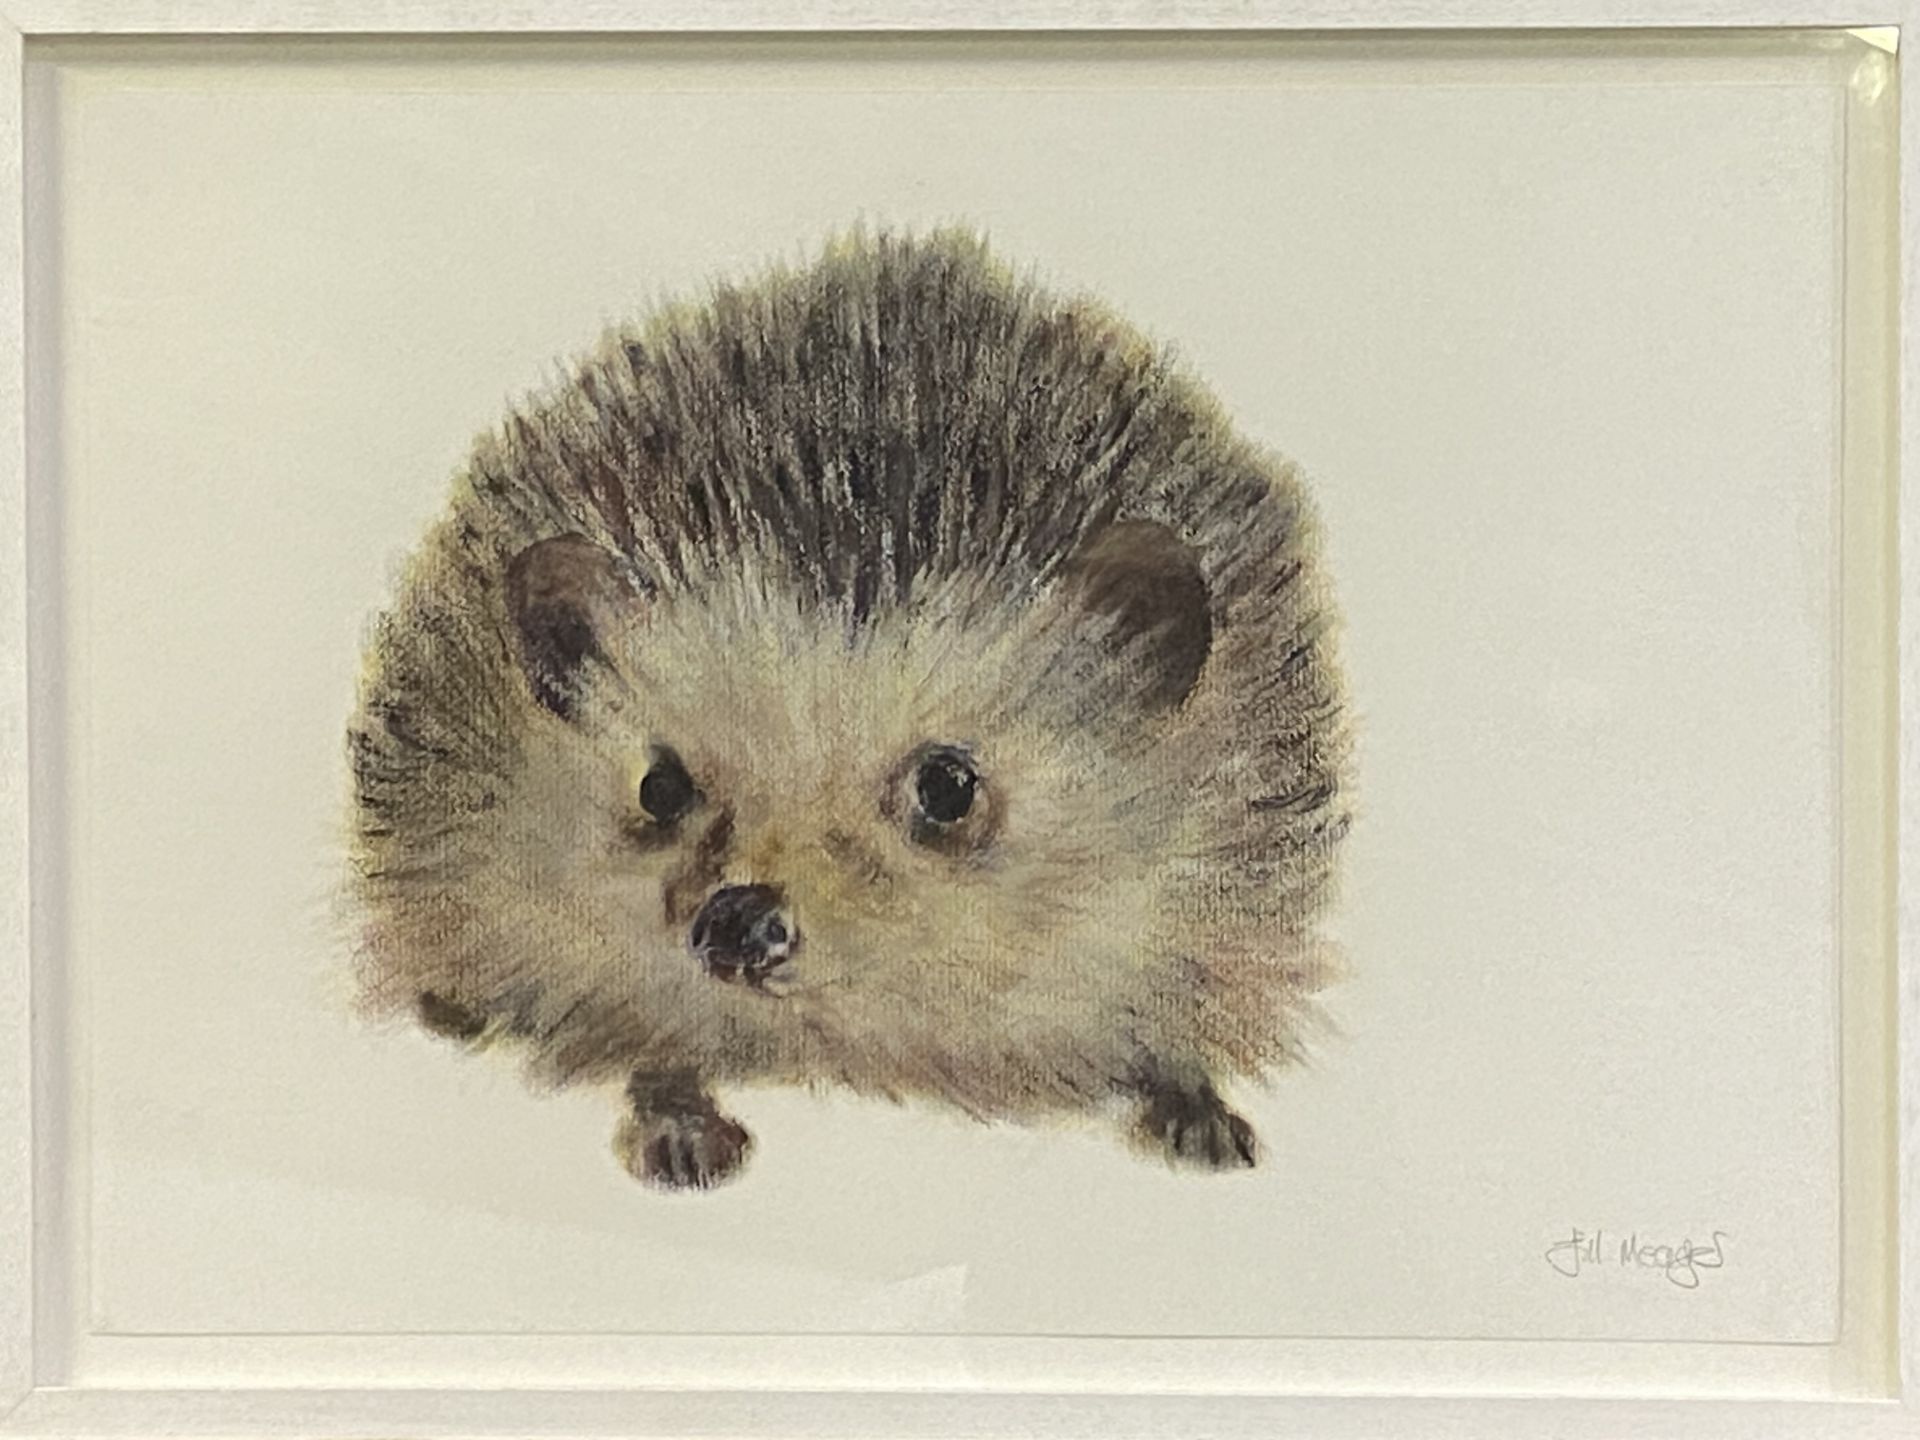 Framed and glazed pastel drawing of a hedgehog, signed Gill Meager - Image 2 of 4